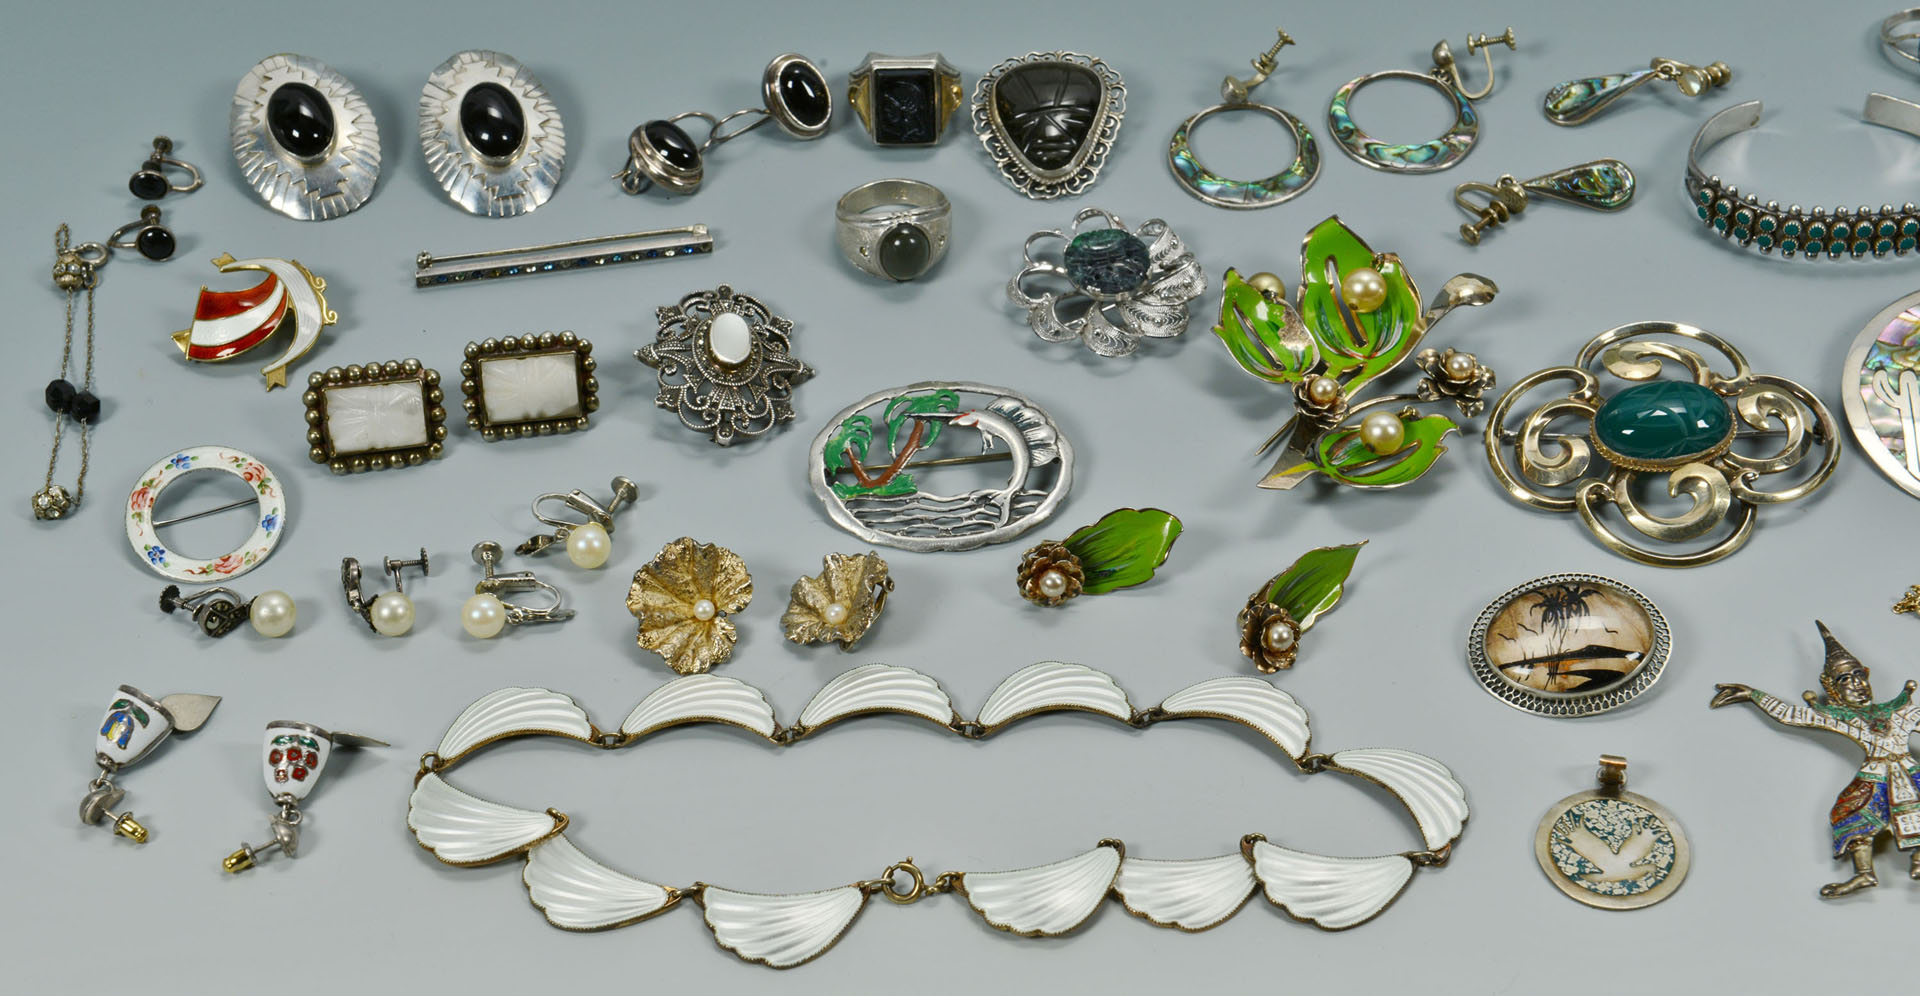 Lot 746: Large lot of silver jewelry with enamel and stones